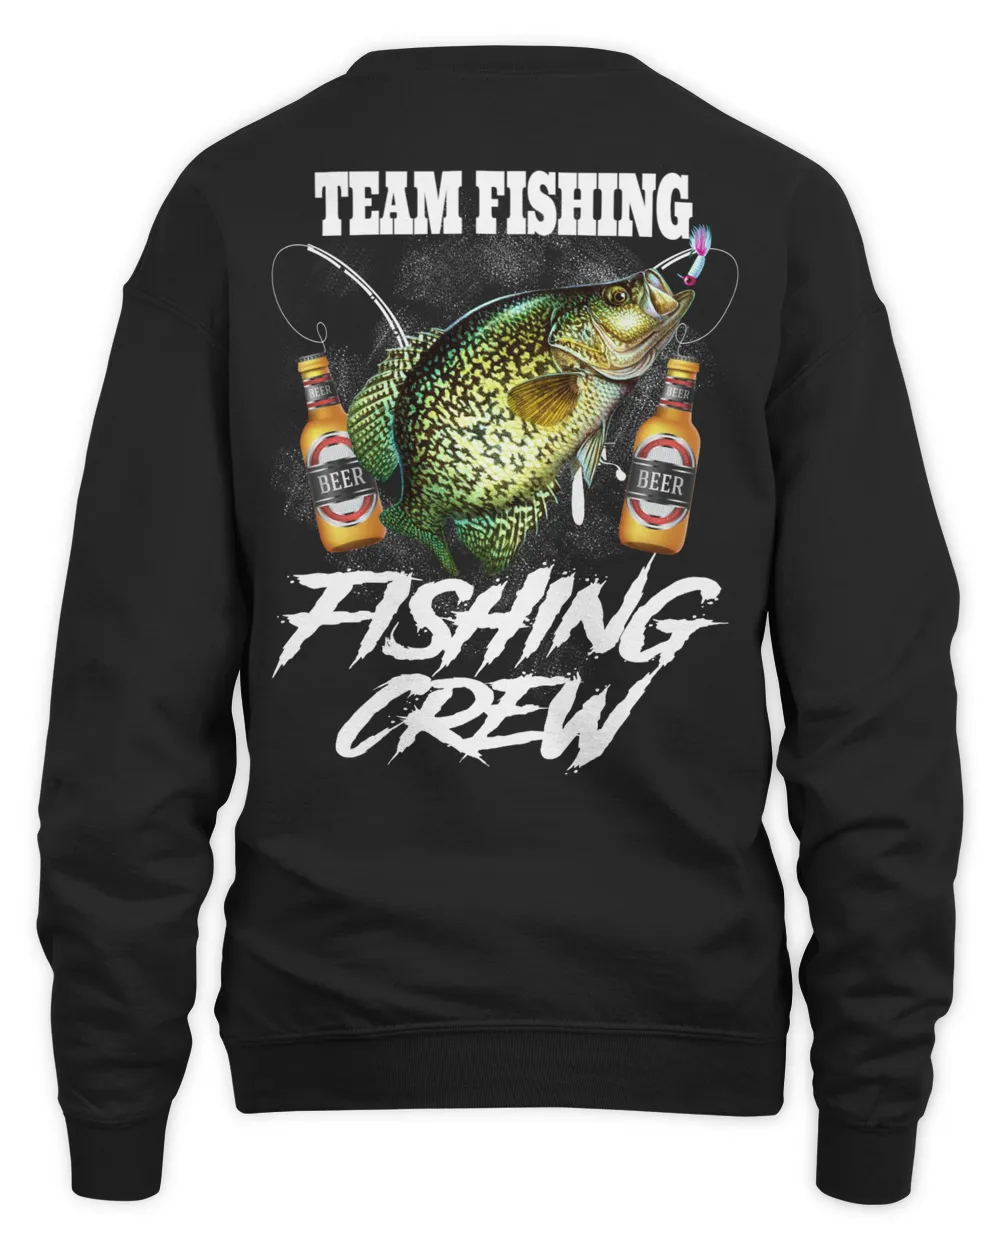 Crappies Fishing: Custom Name For Your Fishing Team.